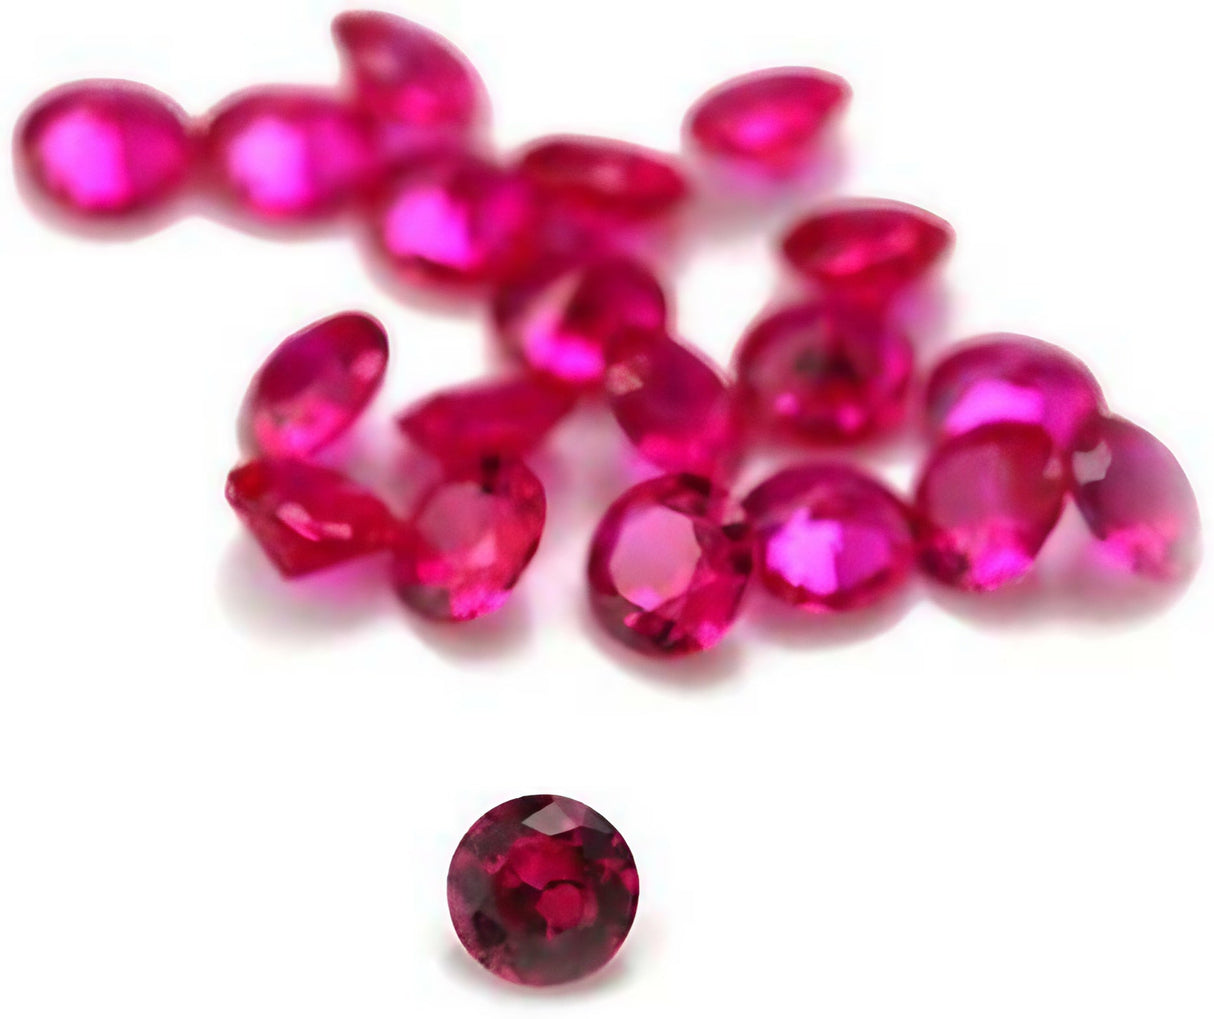 Calibear 6mm Pink Diamond Cut Terp Pearls, Set of 10, for Dab Rigs - Top View